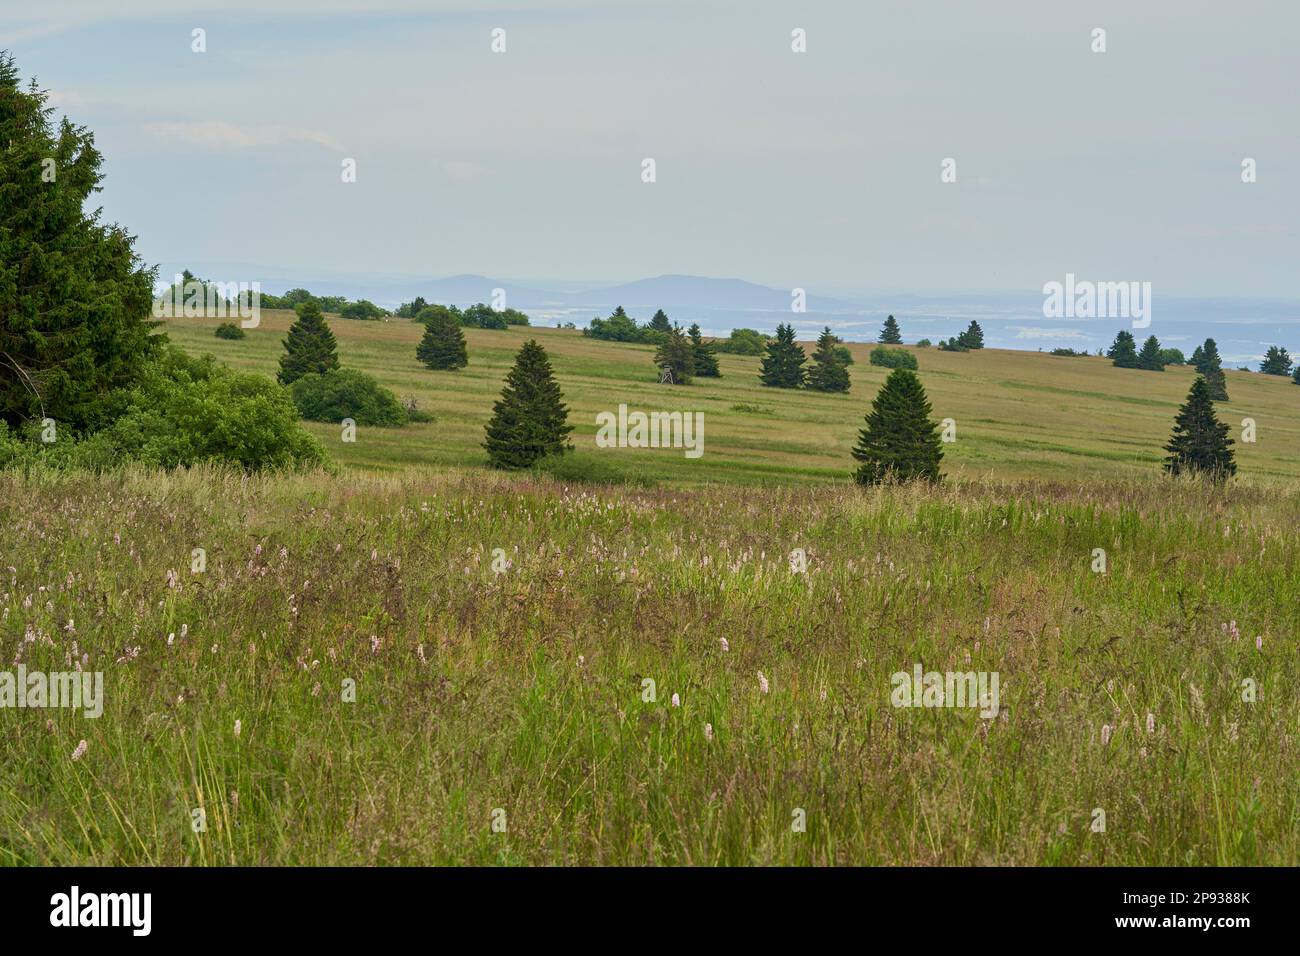 Lange Rhön nature reserve in the core zone of the Rhön biosphere reserve,  Bavarian Rhön, Rhön-Grabfeld district, Lower Franconia, Bavaria, Germany  Stock Photo - Alamy